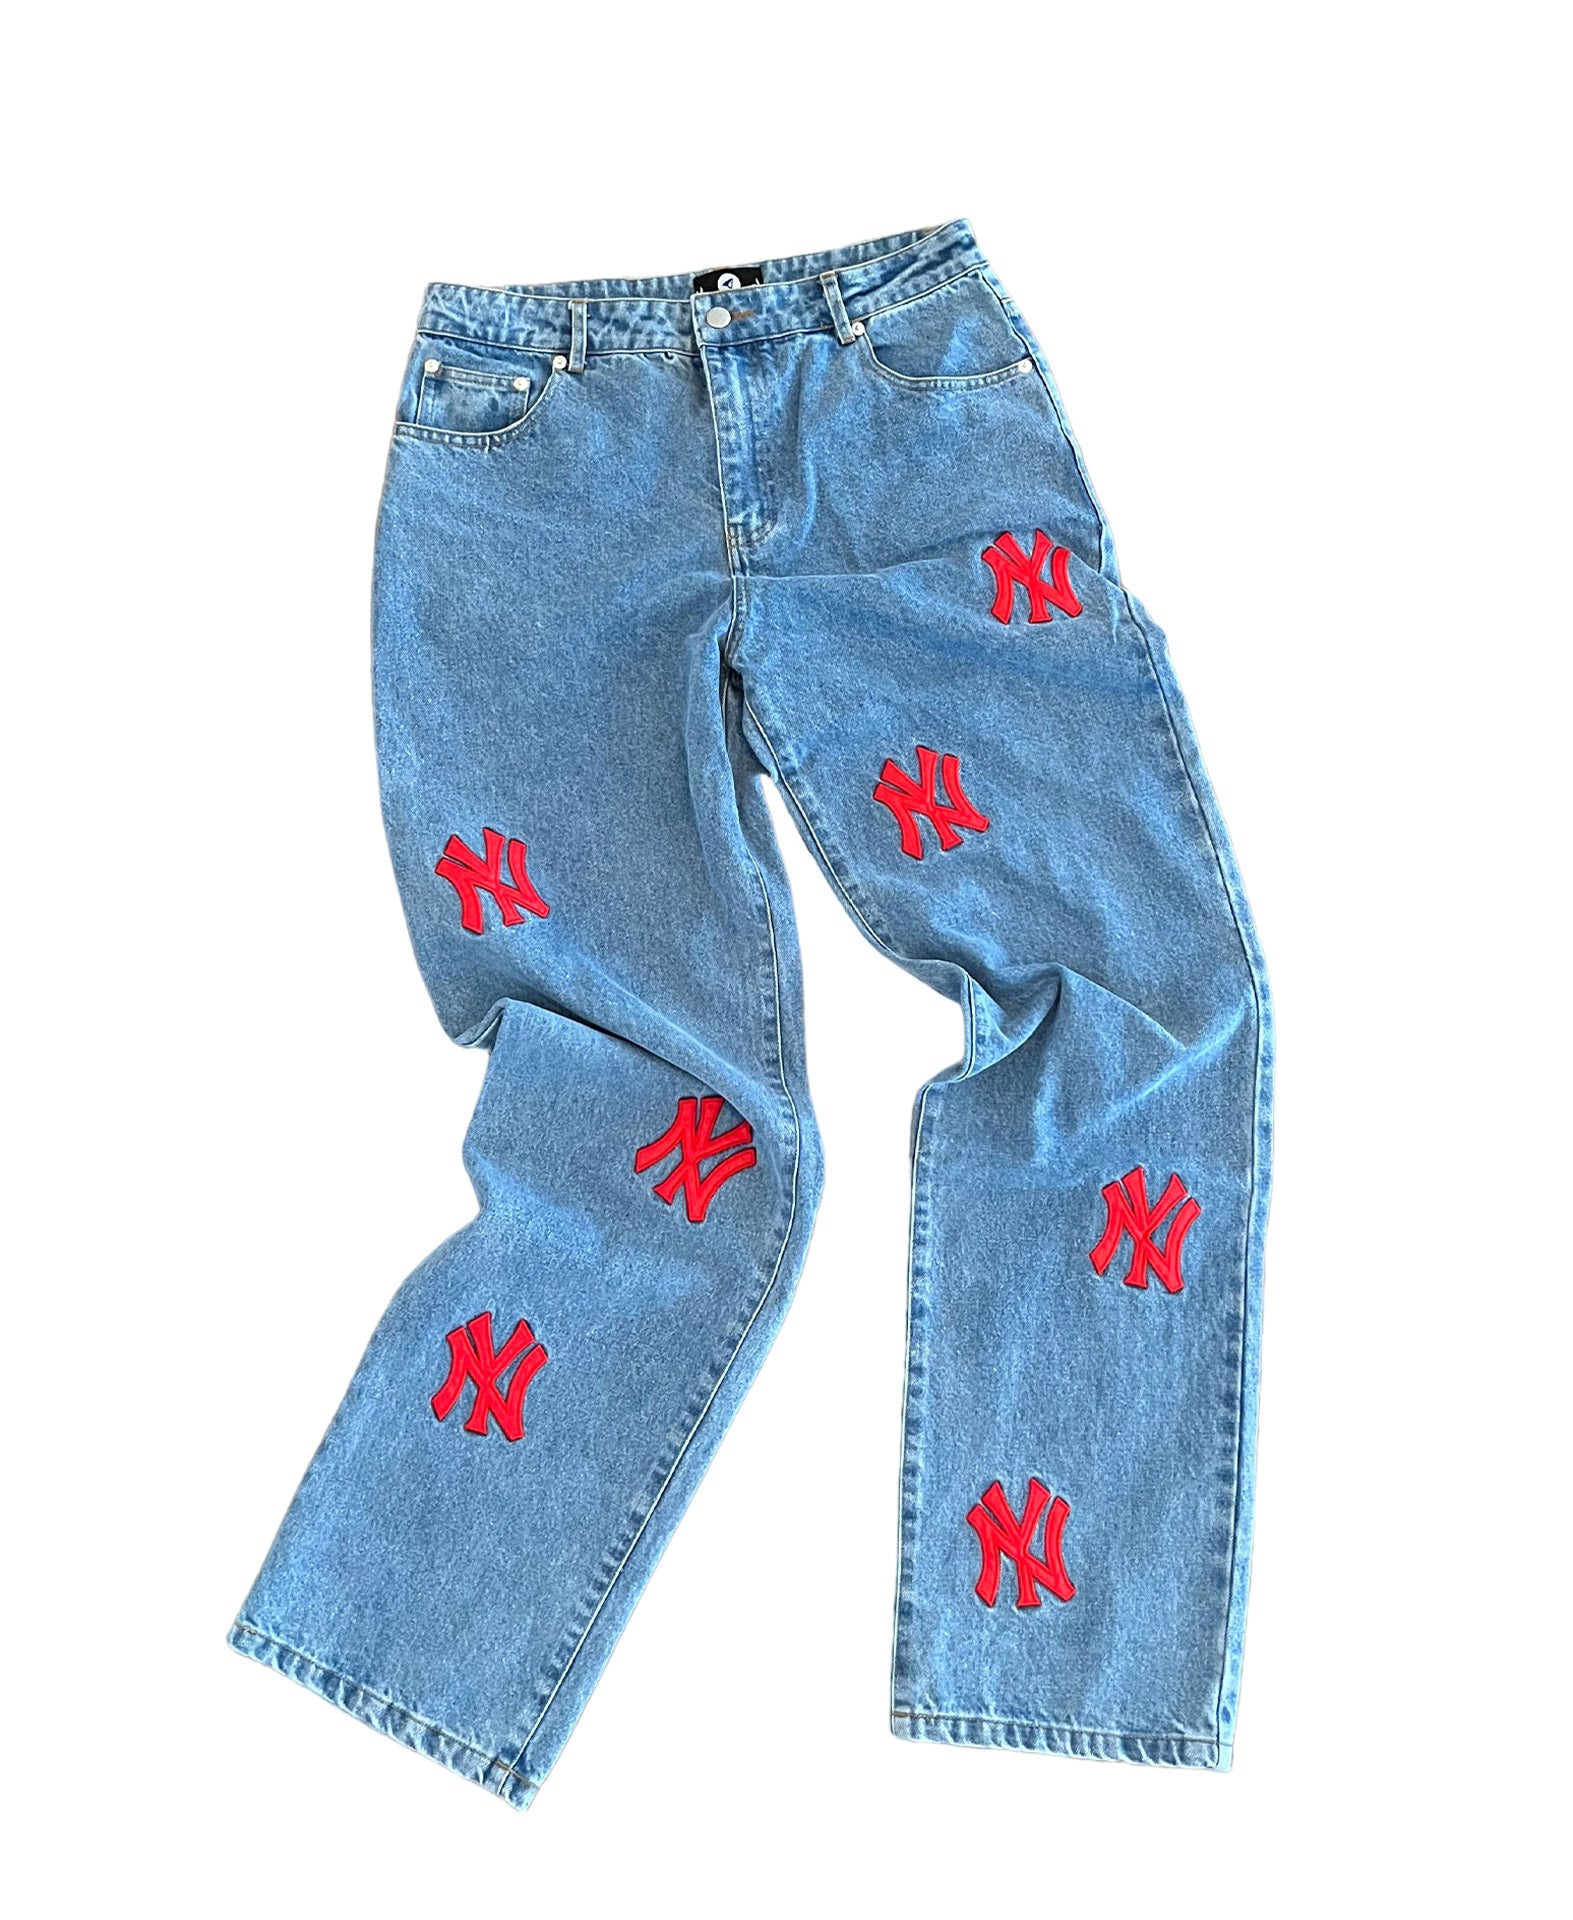 New York Patch Jeans - Blue – ABSTRACTBYJULES wash